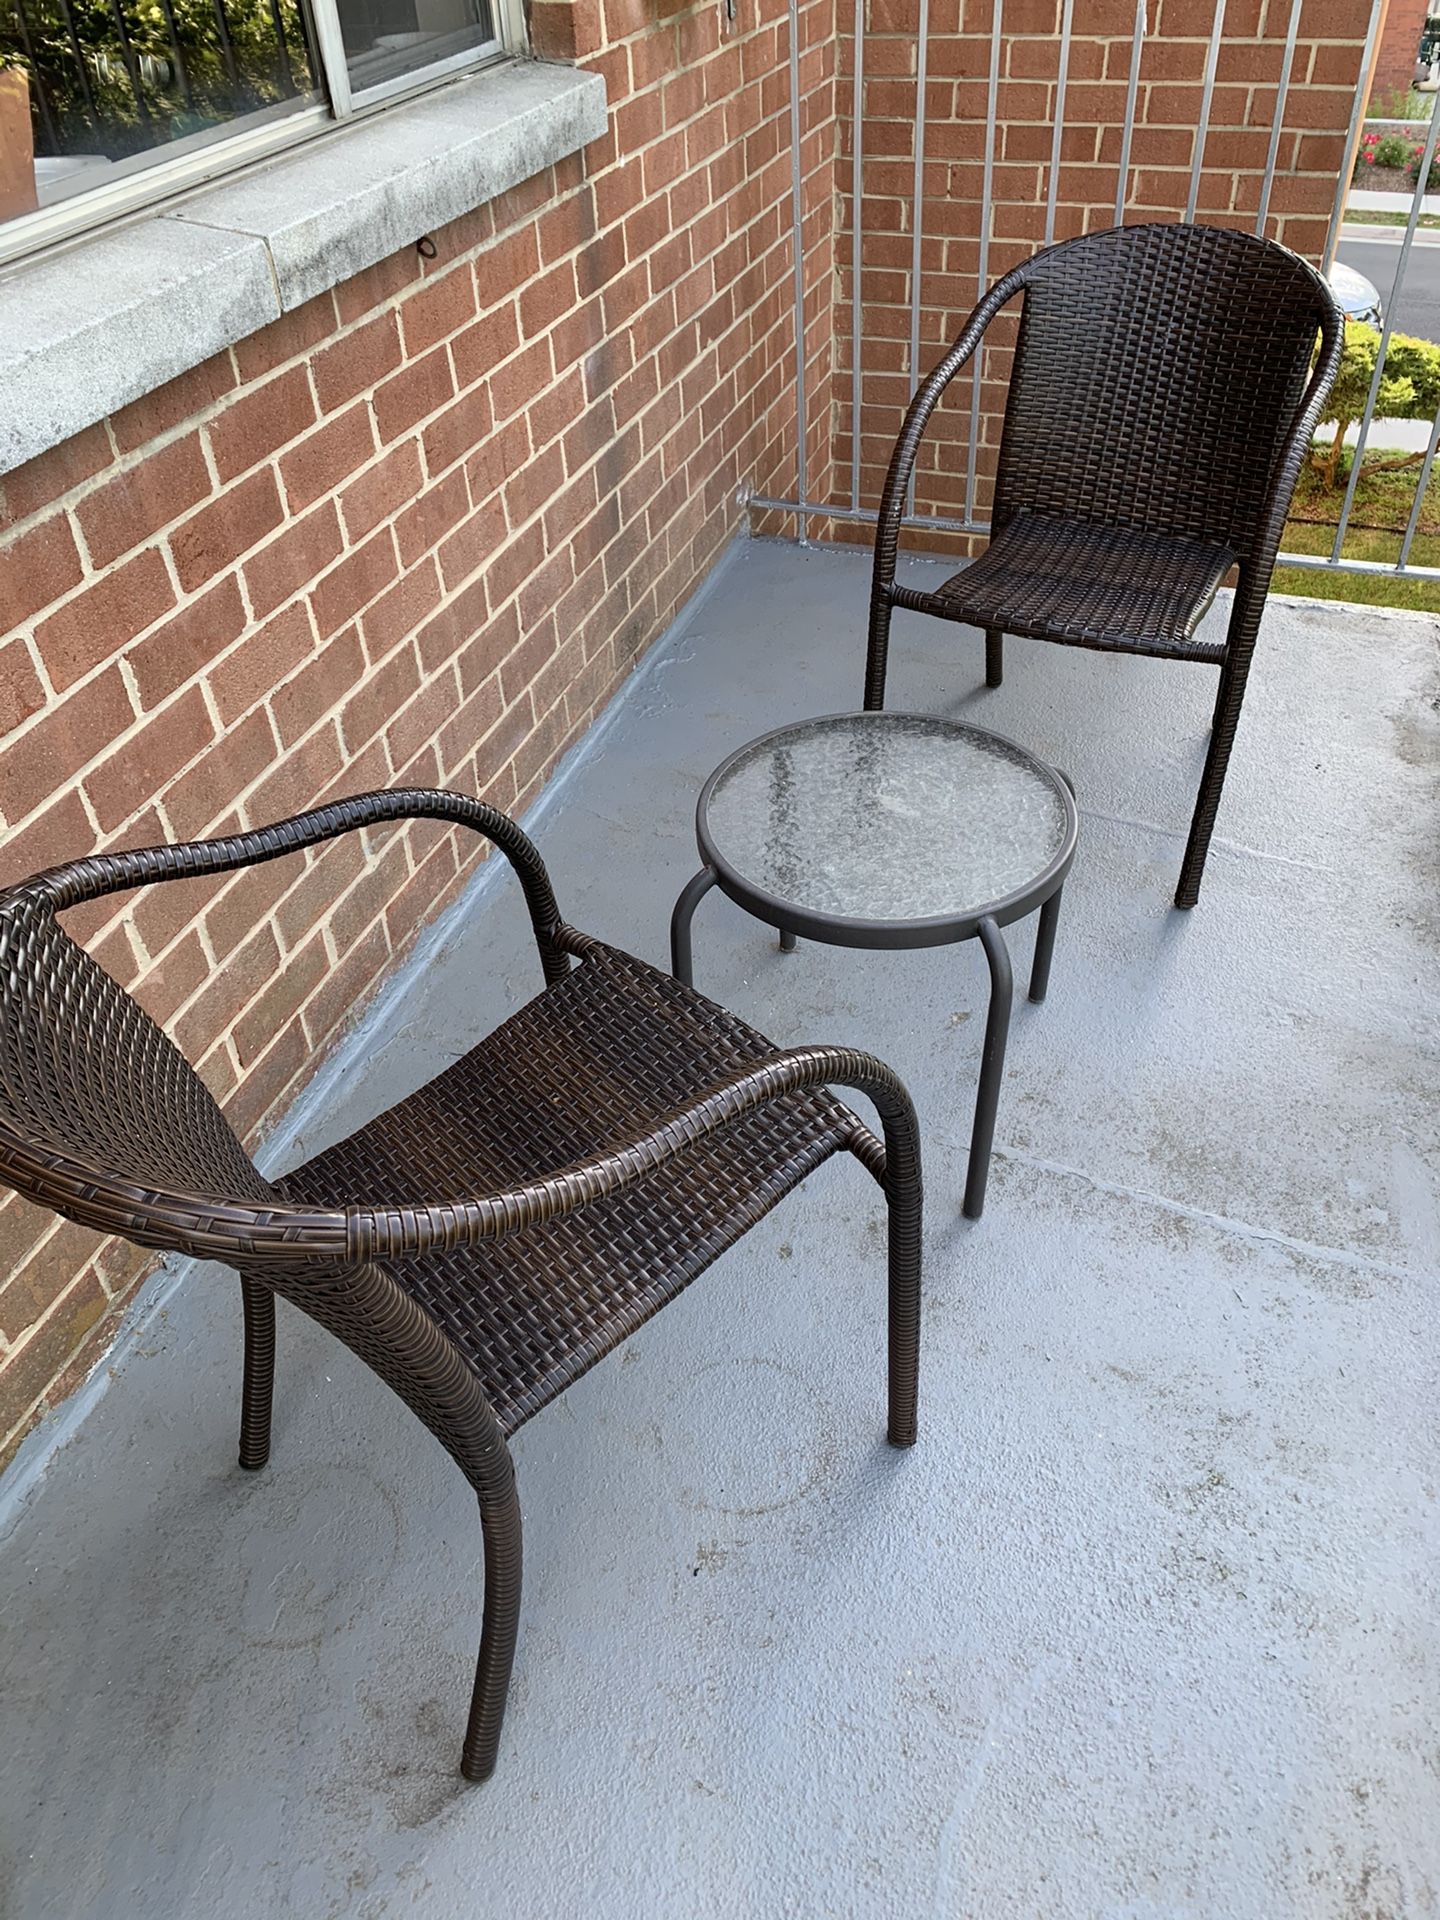 Outdoor Patio Furniture (Very Usable Condition - well kept!)